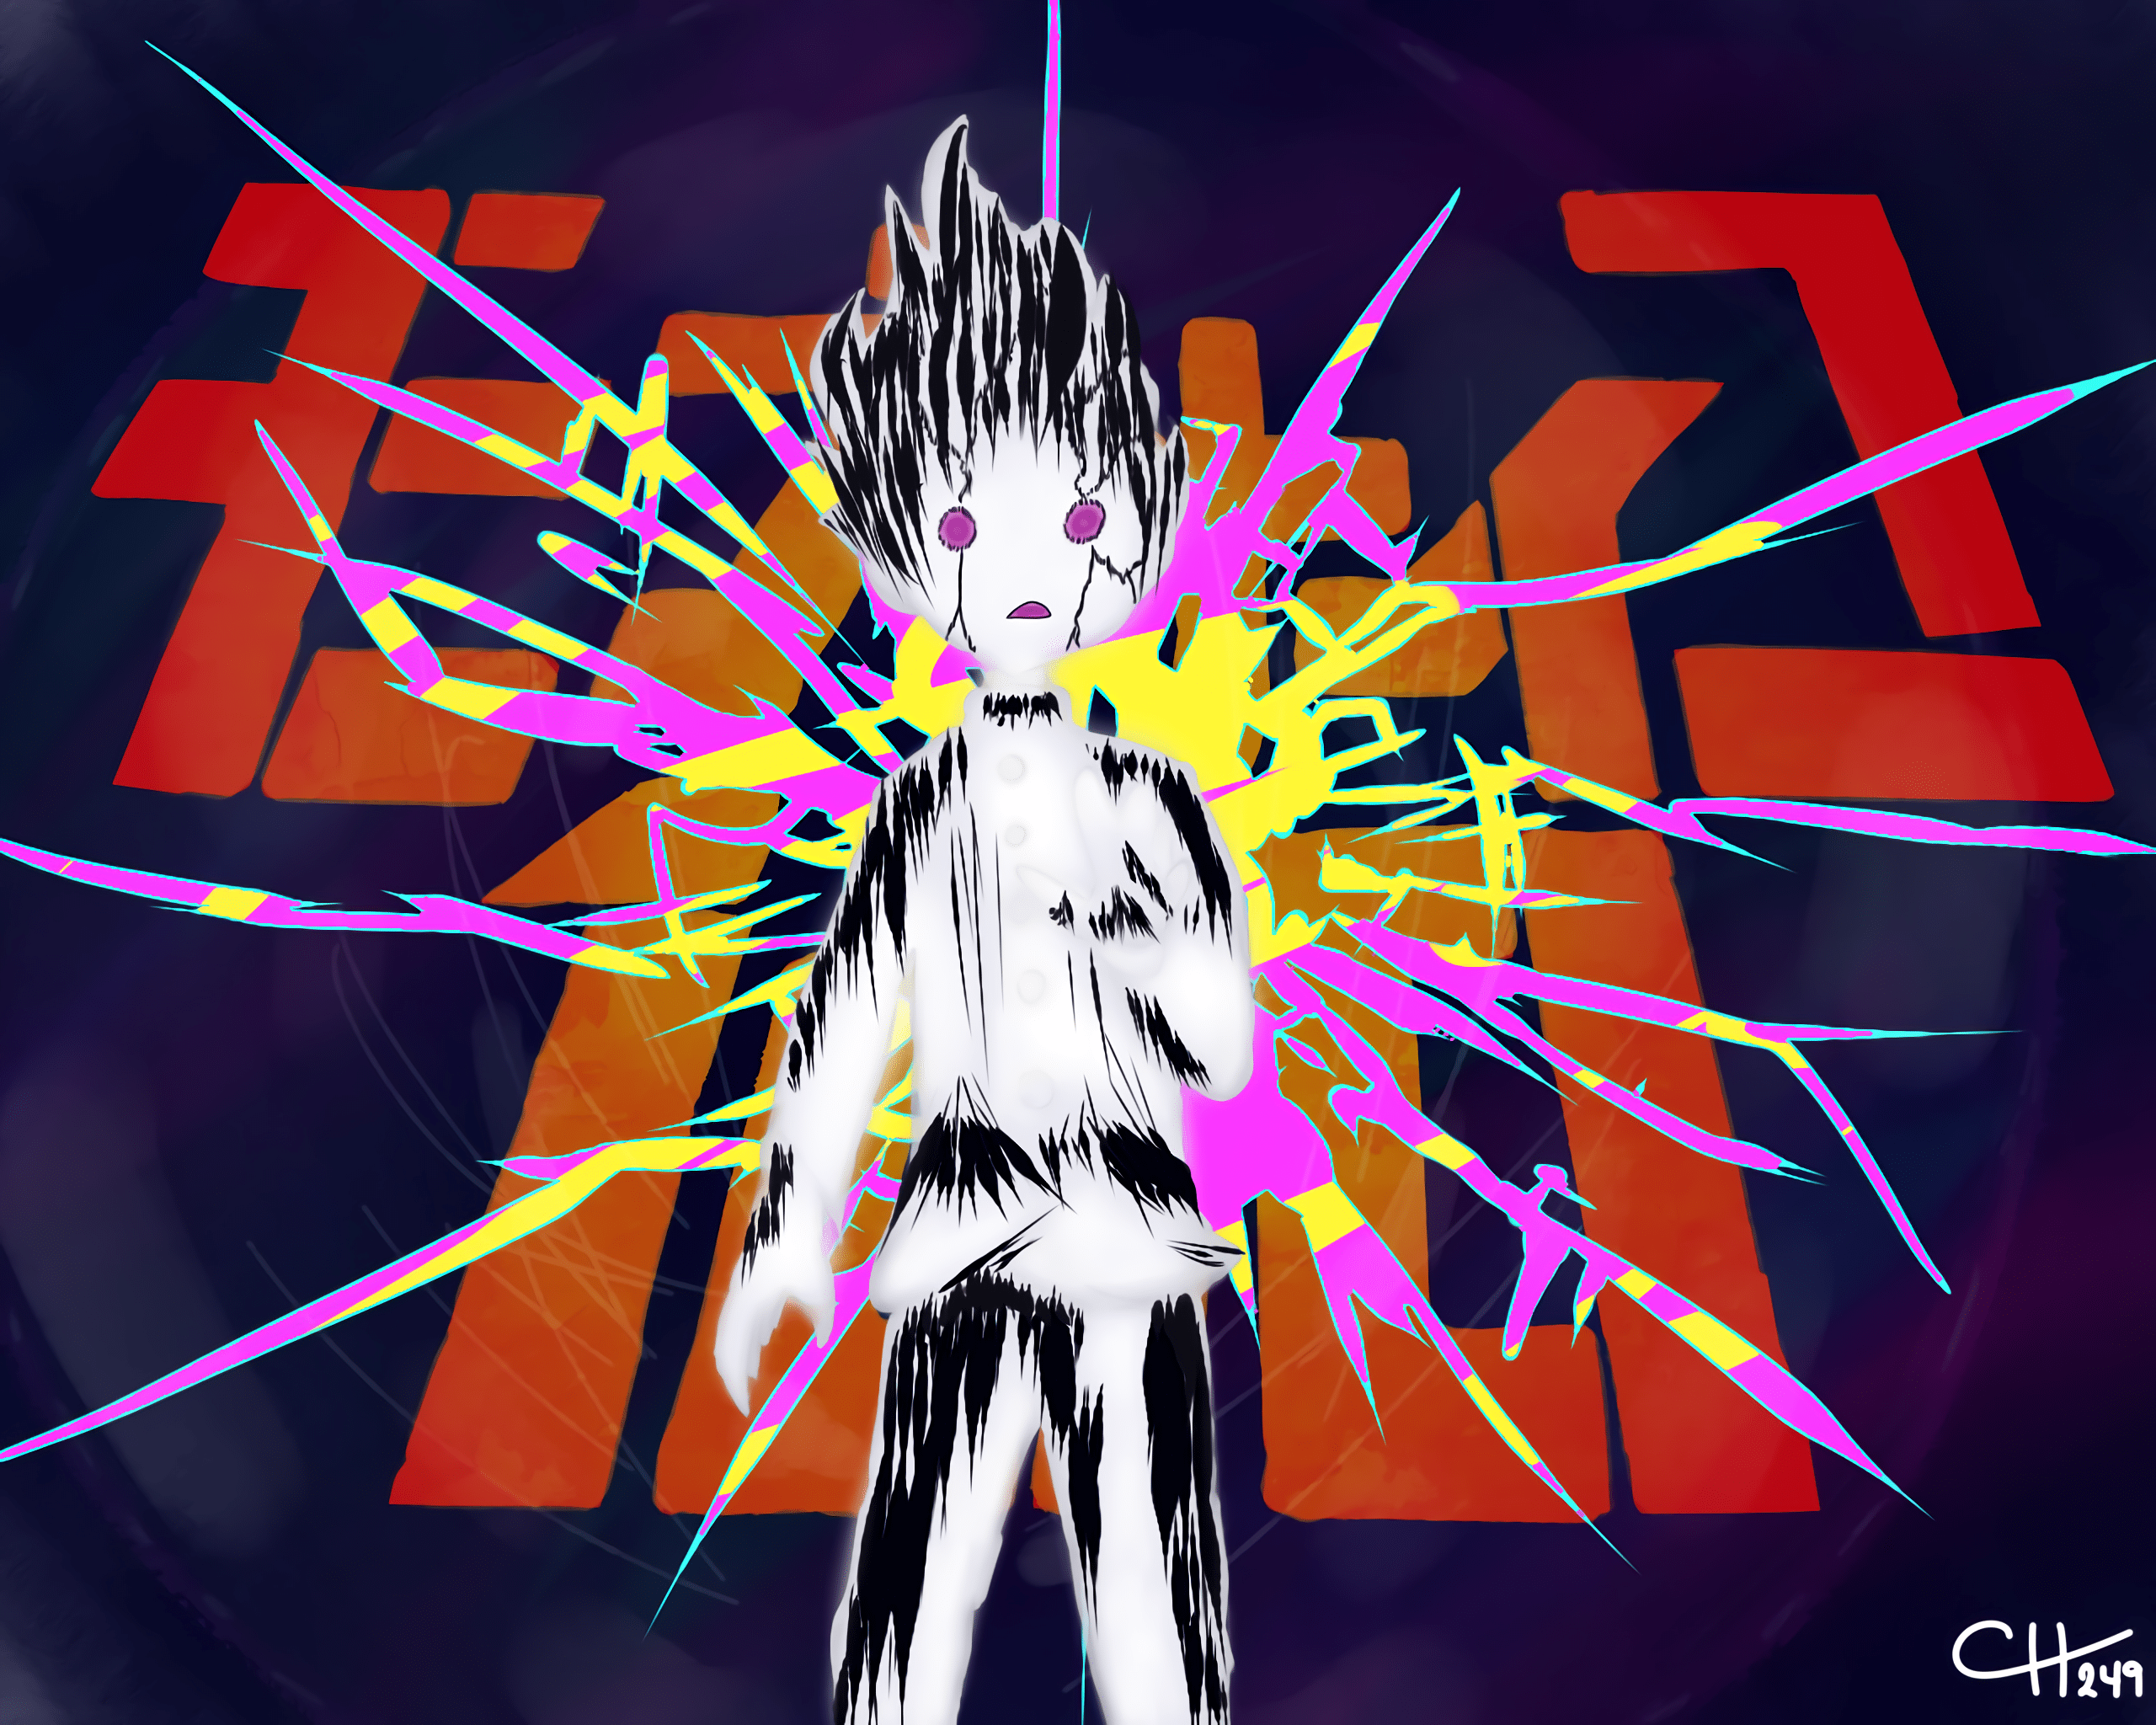 Mob Psycho 100 Wallpapers - Top Free Mob Psycho 100 Backgrounds